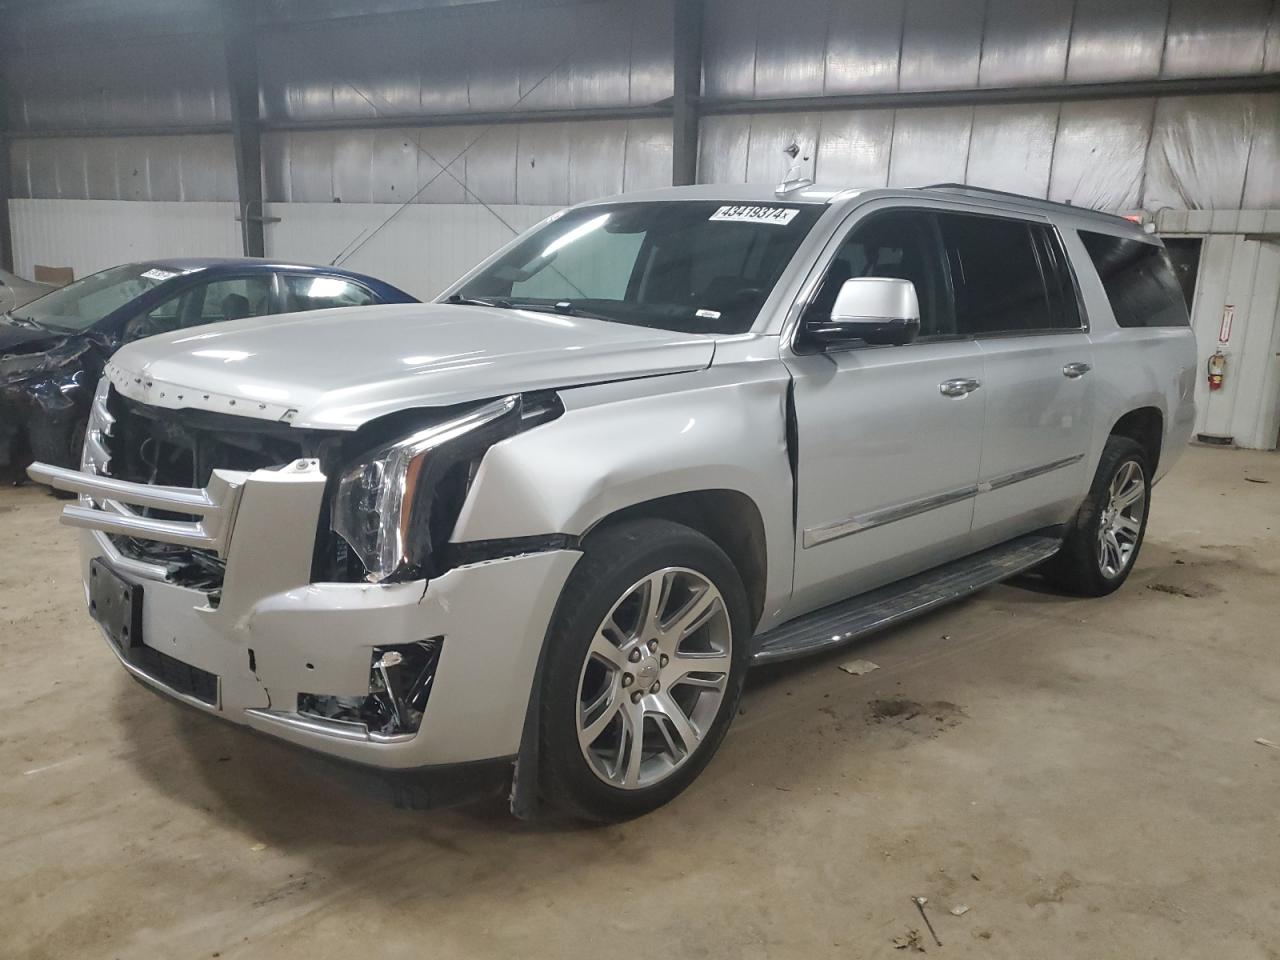 vin: 1GYS4TKJXFR577475 1GYS4TKJXFR577475 2015 cadillac escalade 6200 for Sale in 50317, Ia - Des Moines, Des Moines, USA